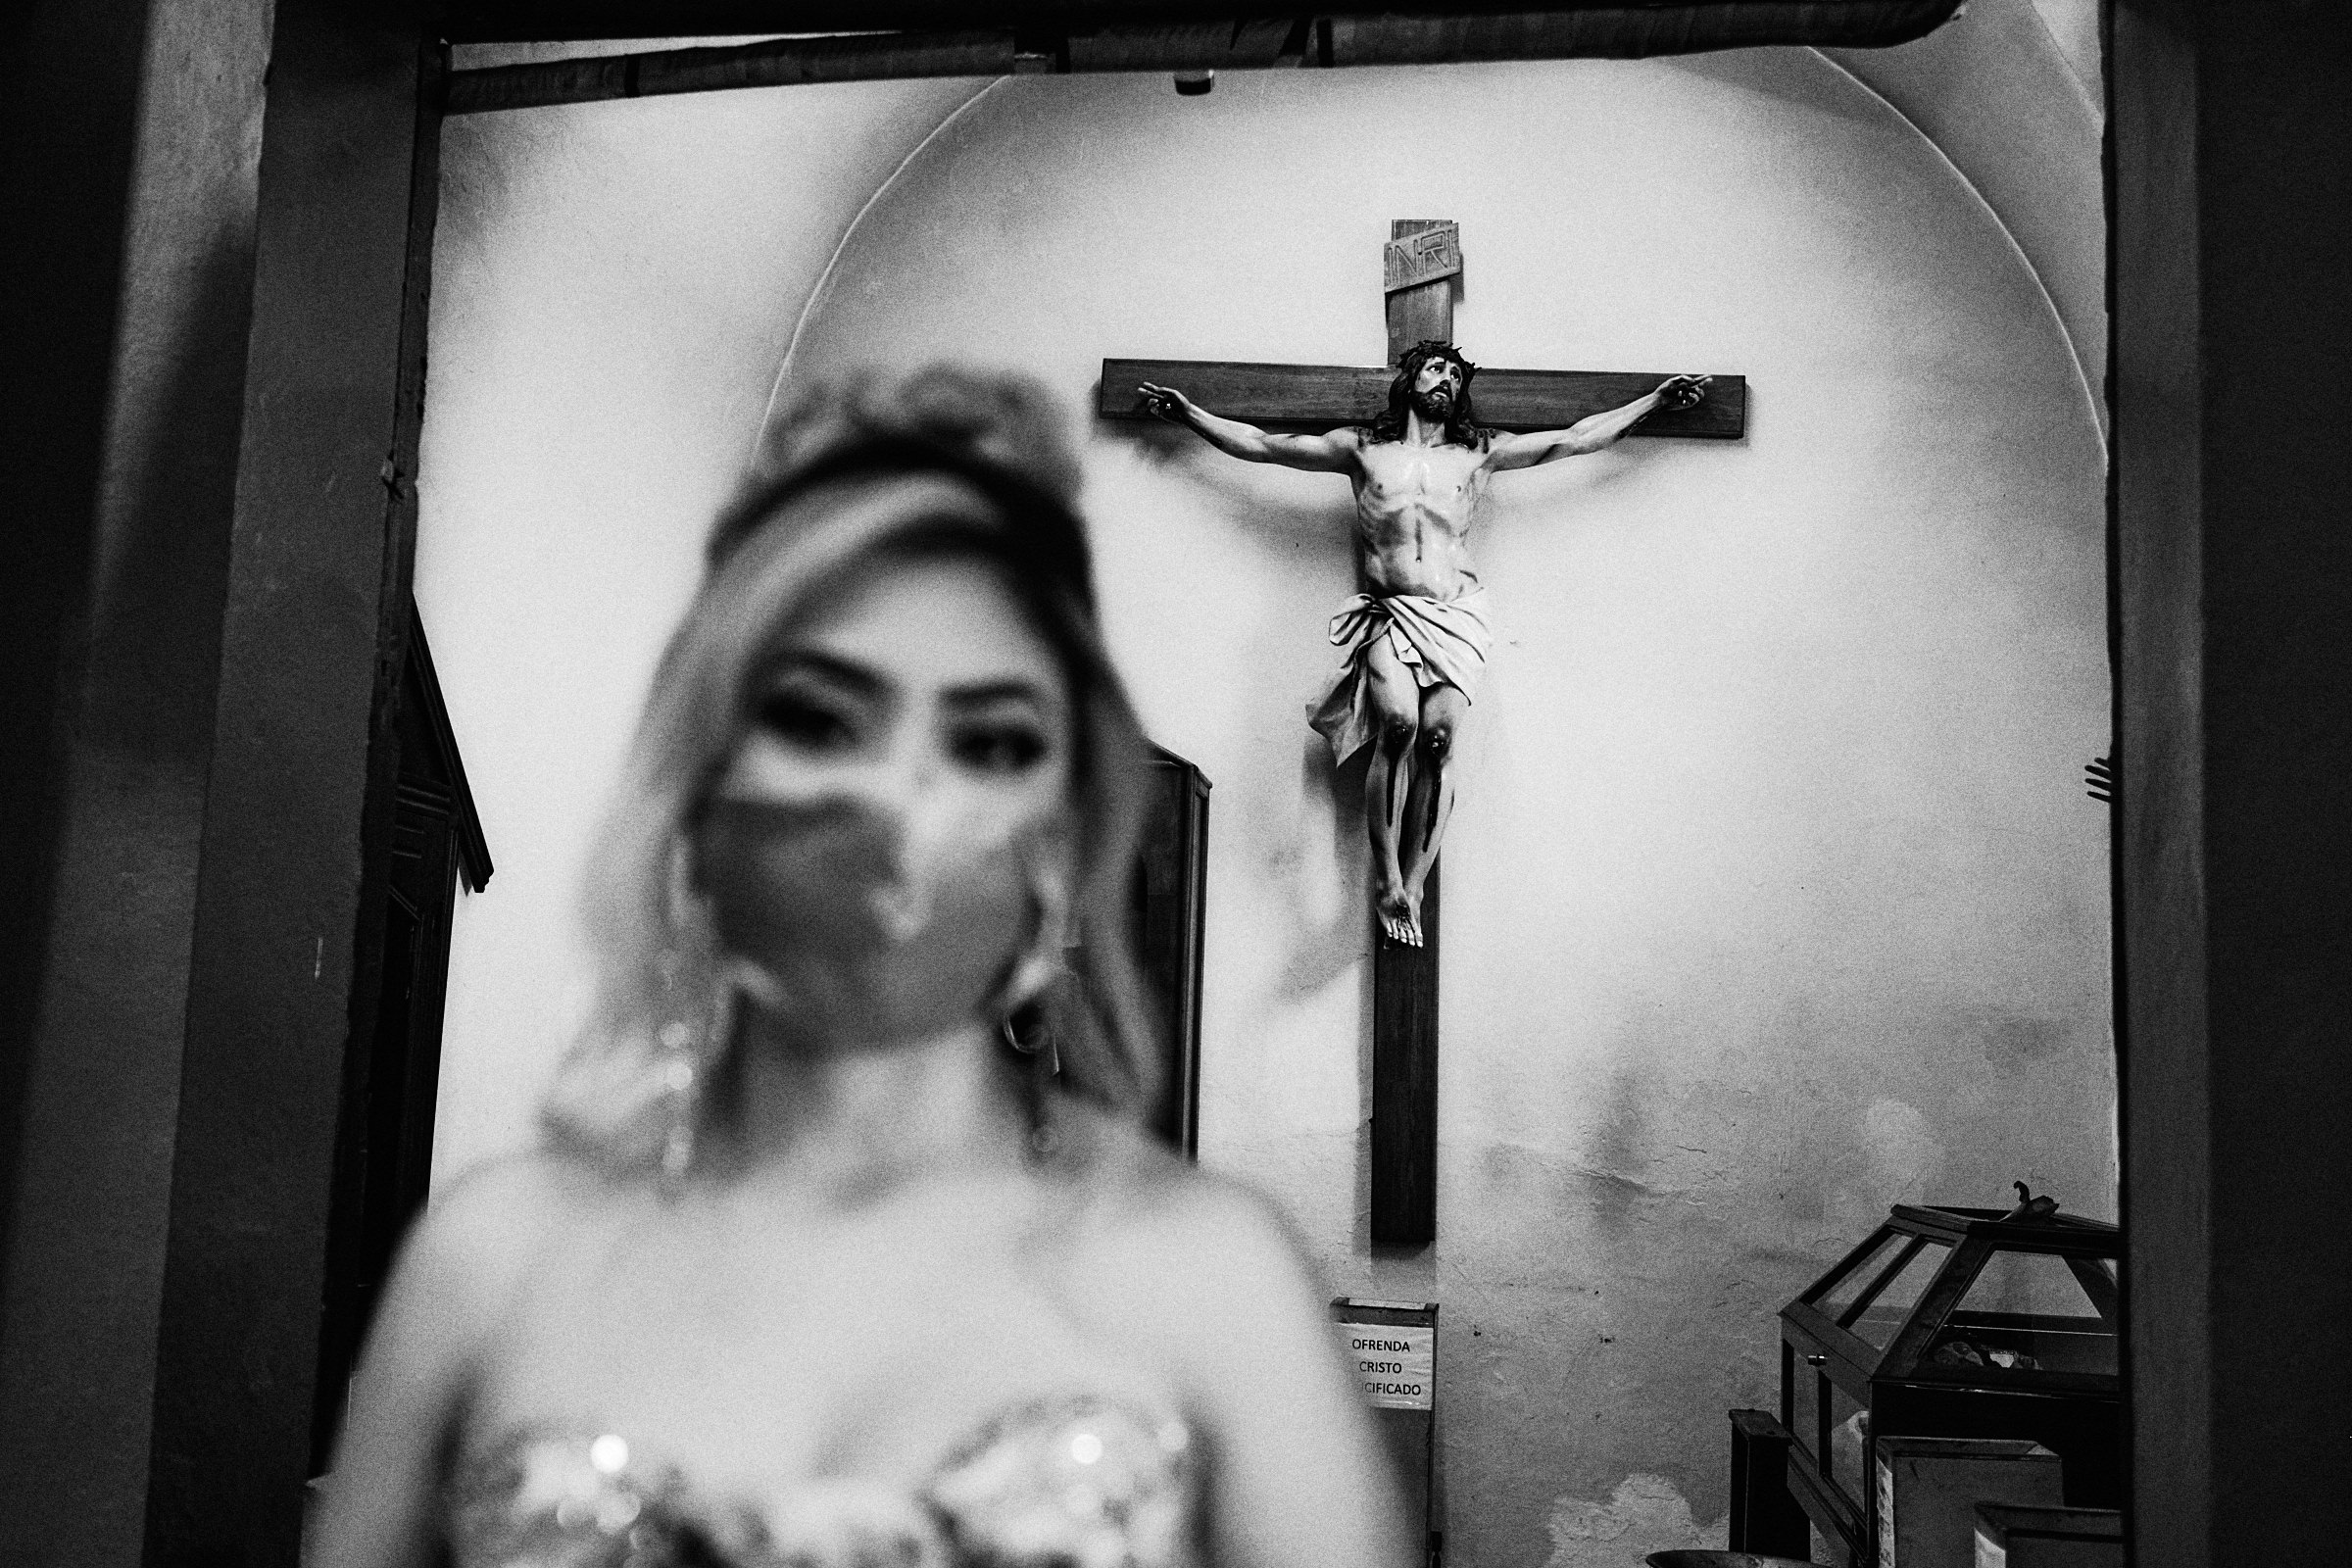 Crucifix In The Background With A Bridesmaid Looking Directly At Camera